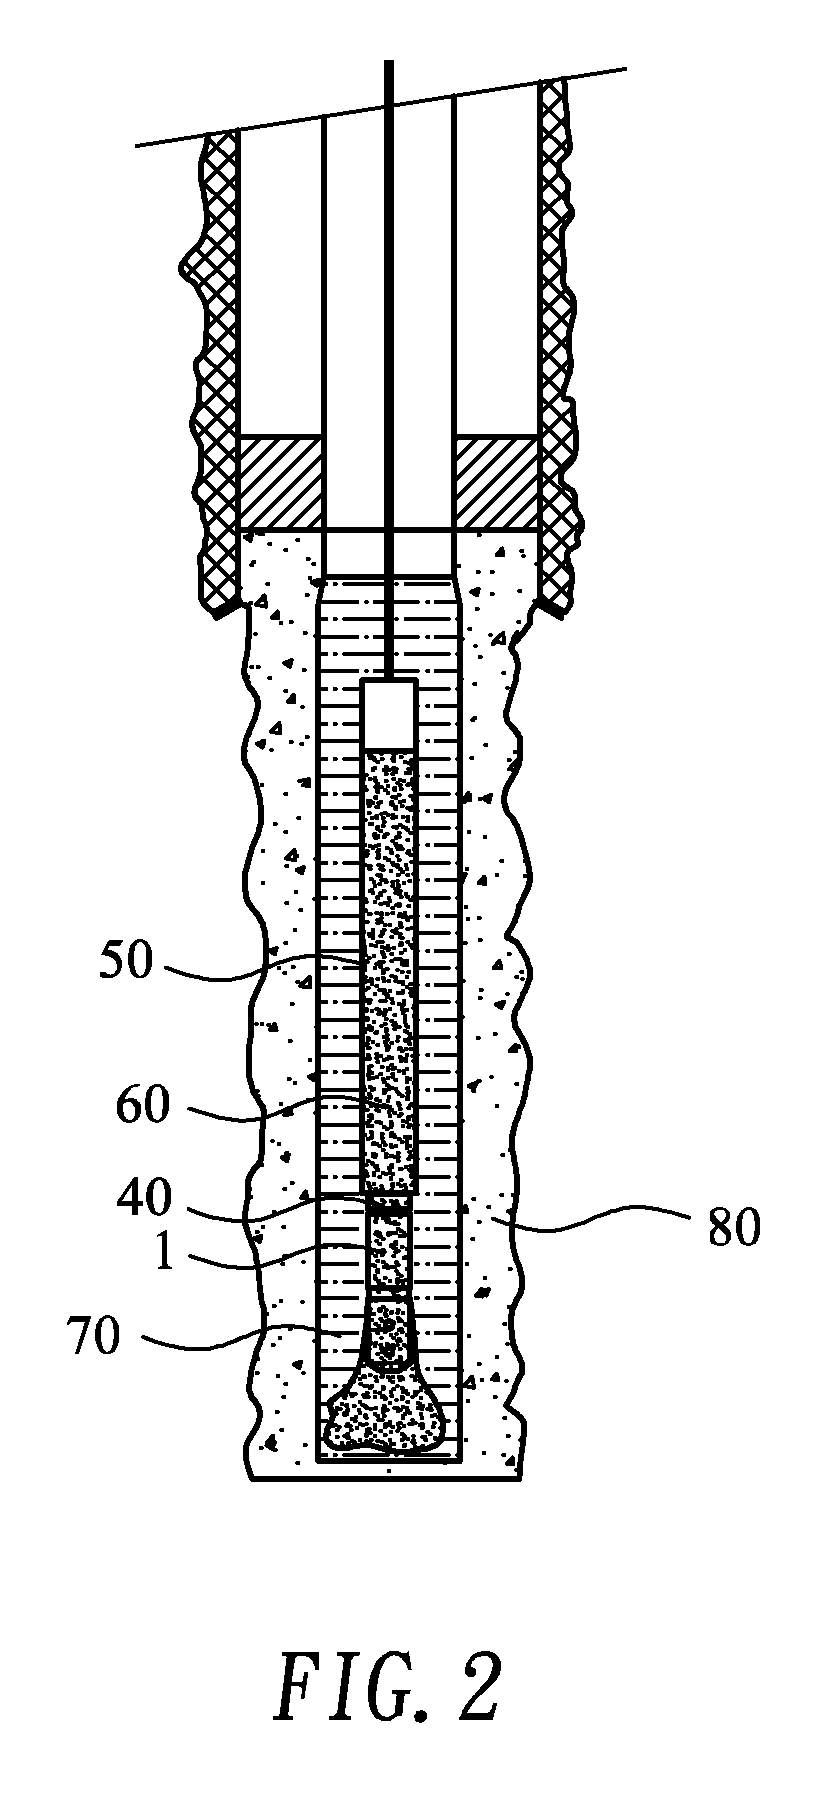 Throttle unit for dump bailer and method of blocking a water out zone in a production well utilizing the same